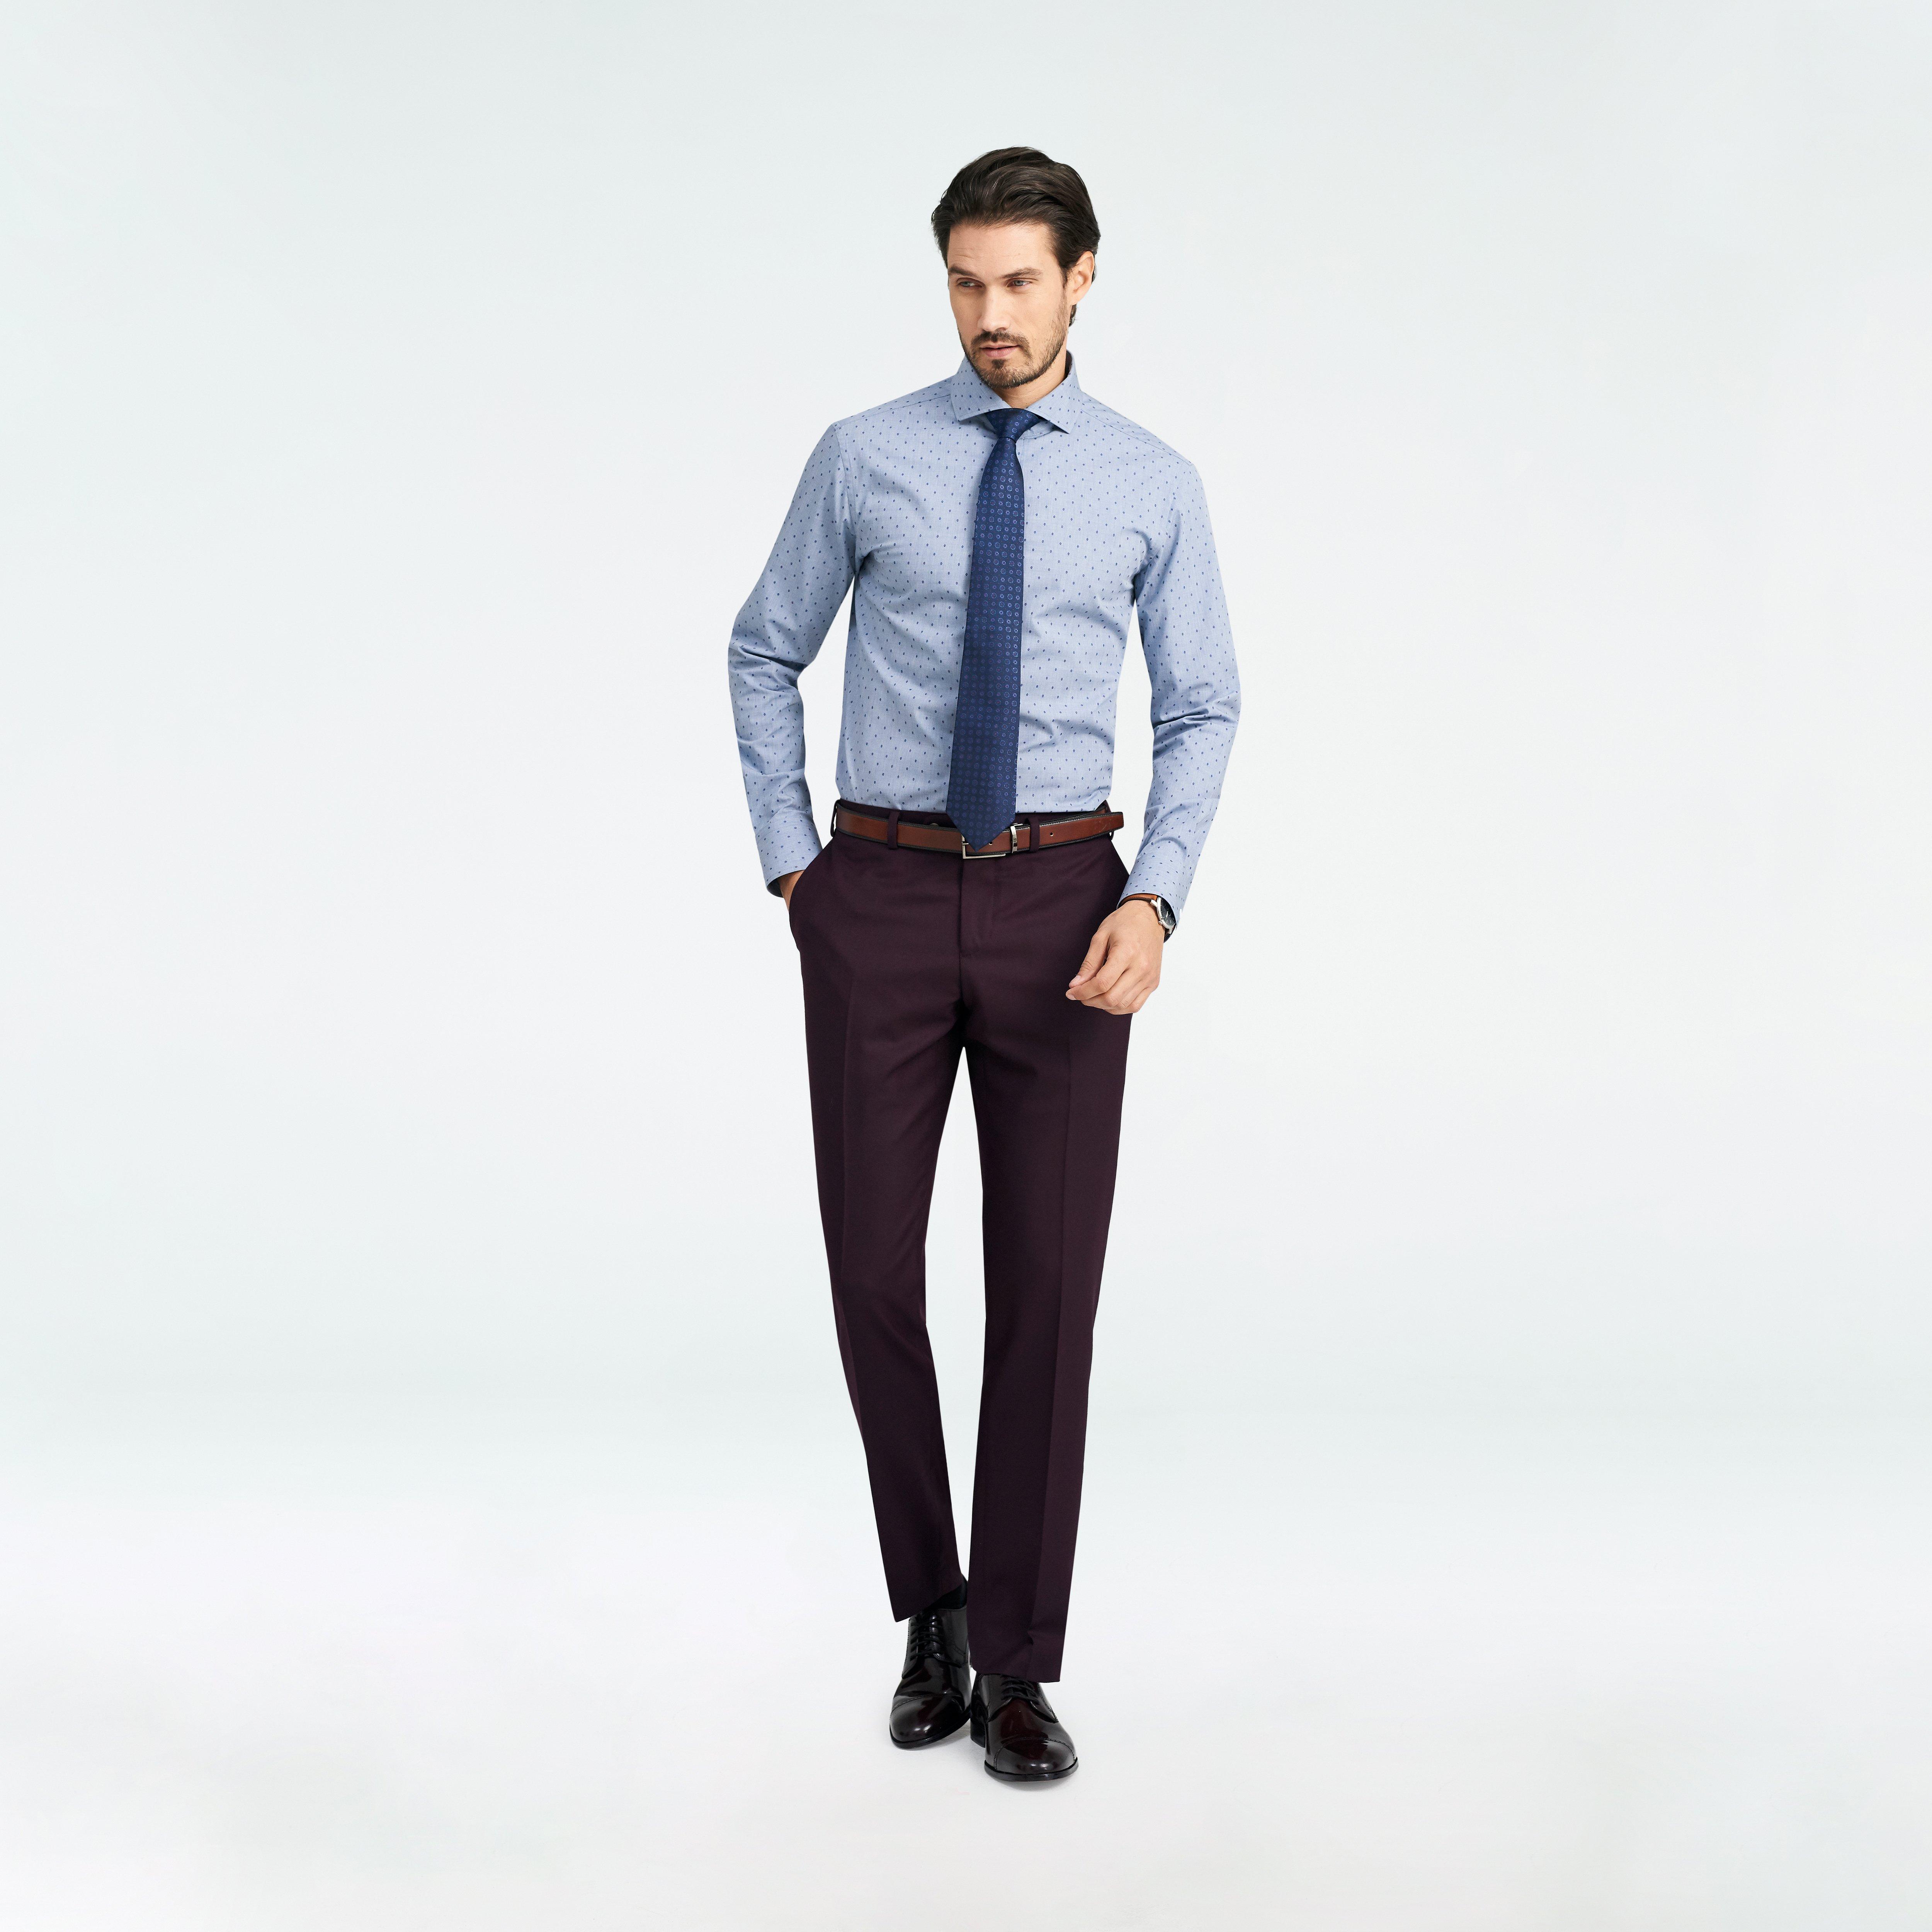 Custom Suits Made For You - Hayward Flannel Burgundy Suit | INDOCHINO